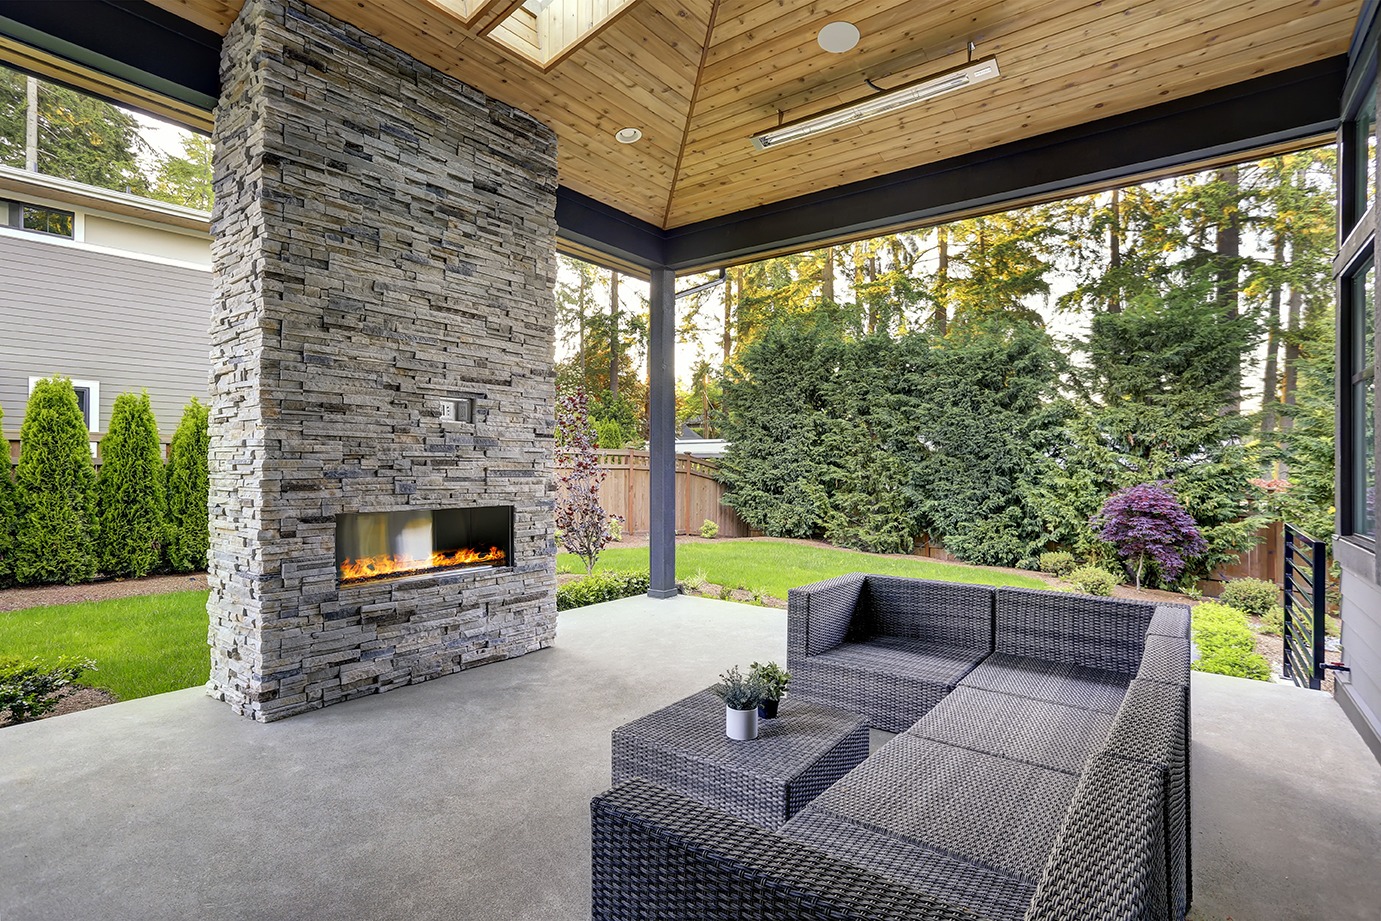 New modern home features a backyard with covered patio accented with stone fireplace, vaulted ceiling with skylights and furnished with gray wicker sofa placed on concrete floor. 